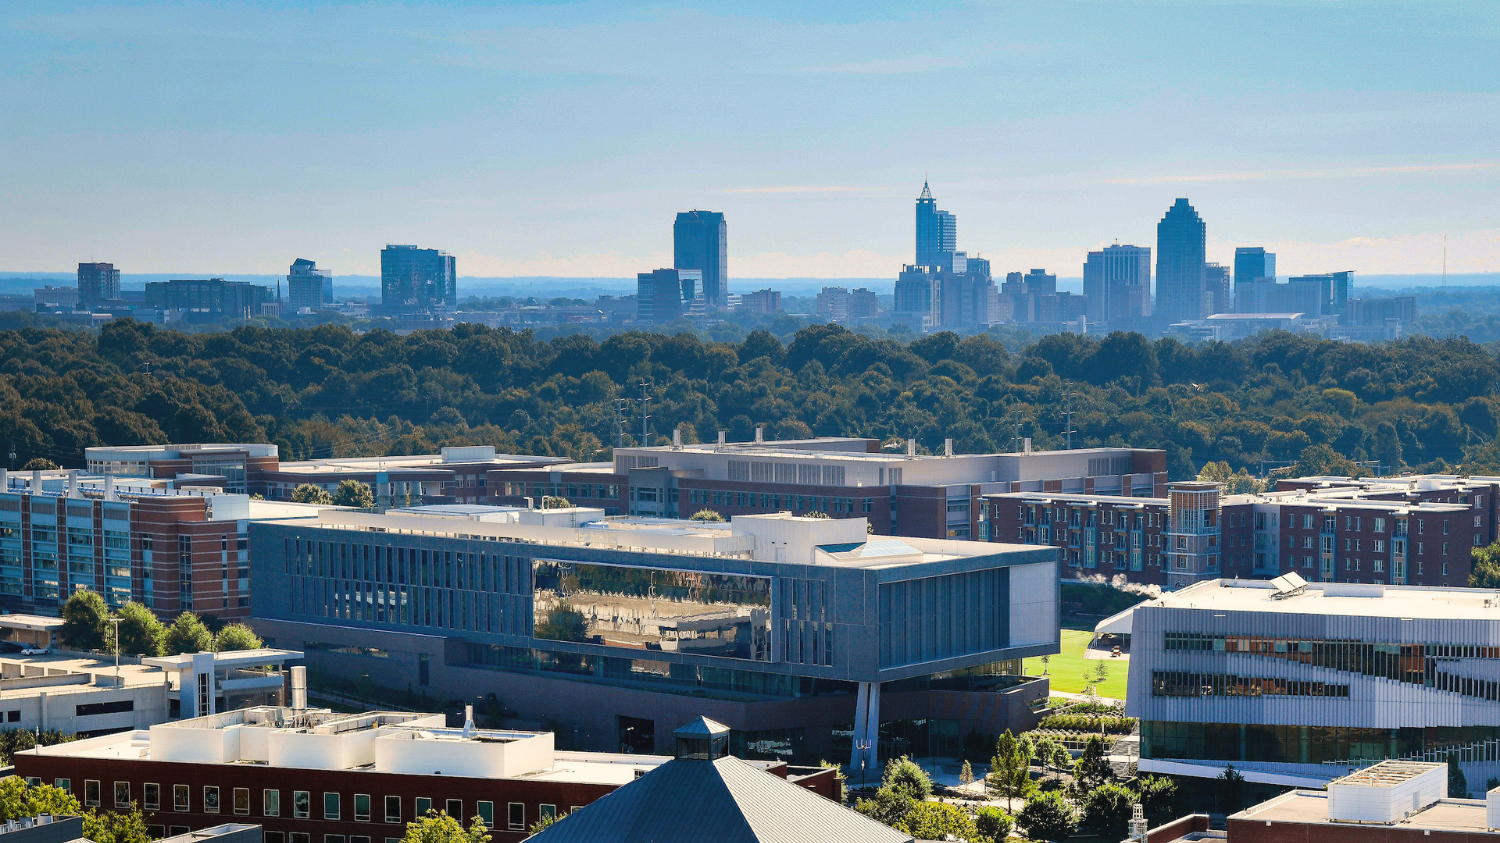 A photo highlighting the engineering buildings, particularly the Fitts-Woolard building, on Centennial Campus, in relation to downtown Raleigh skyline. Photo by Marc Hall